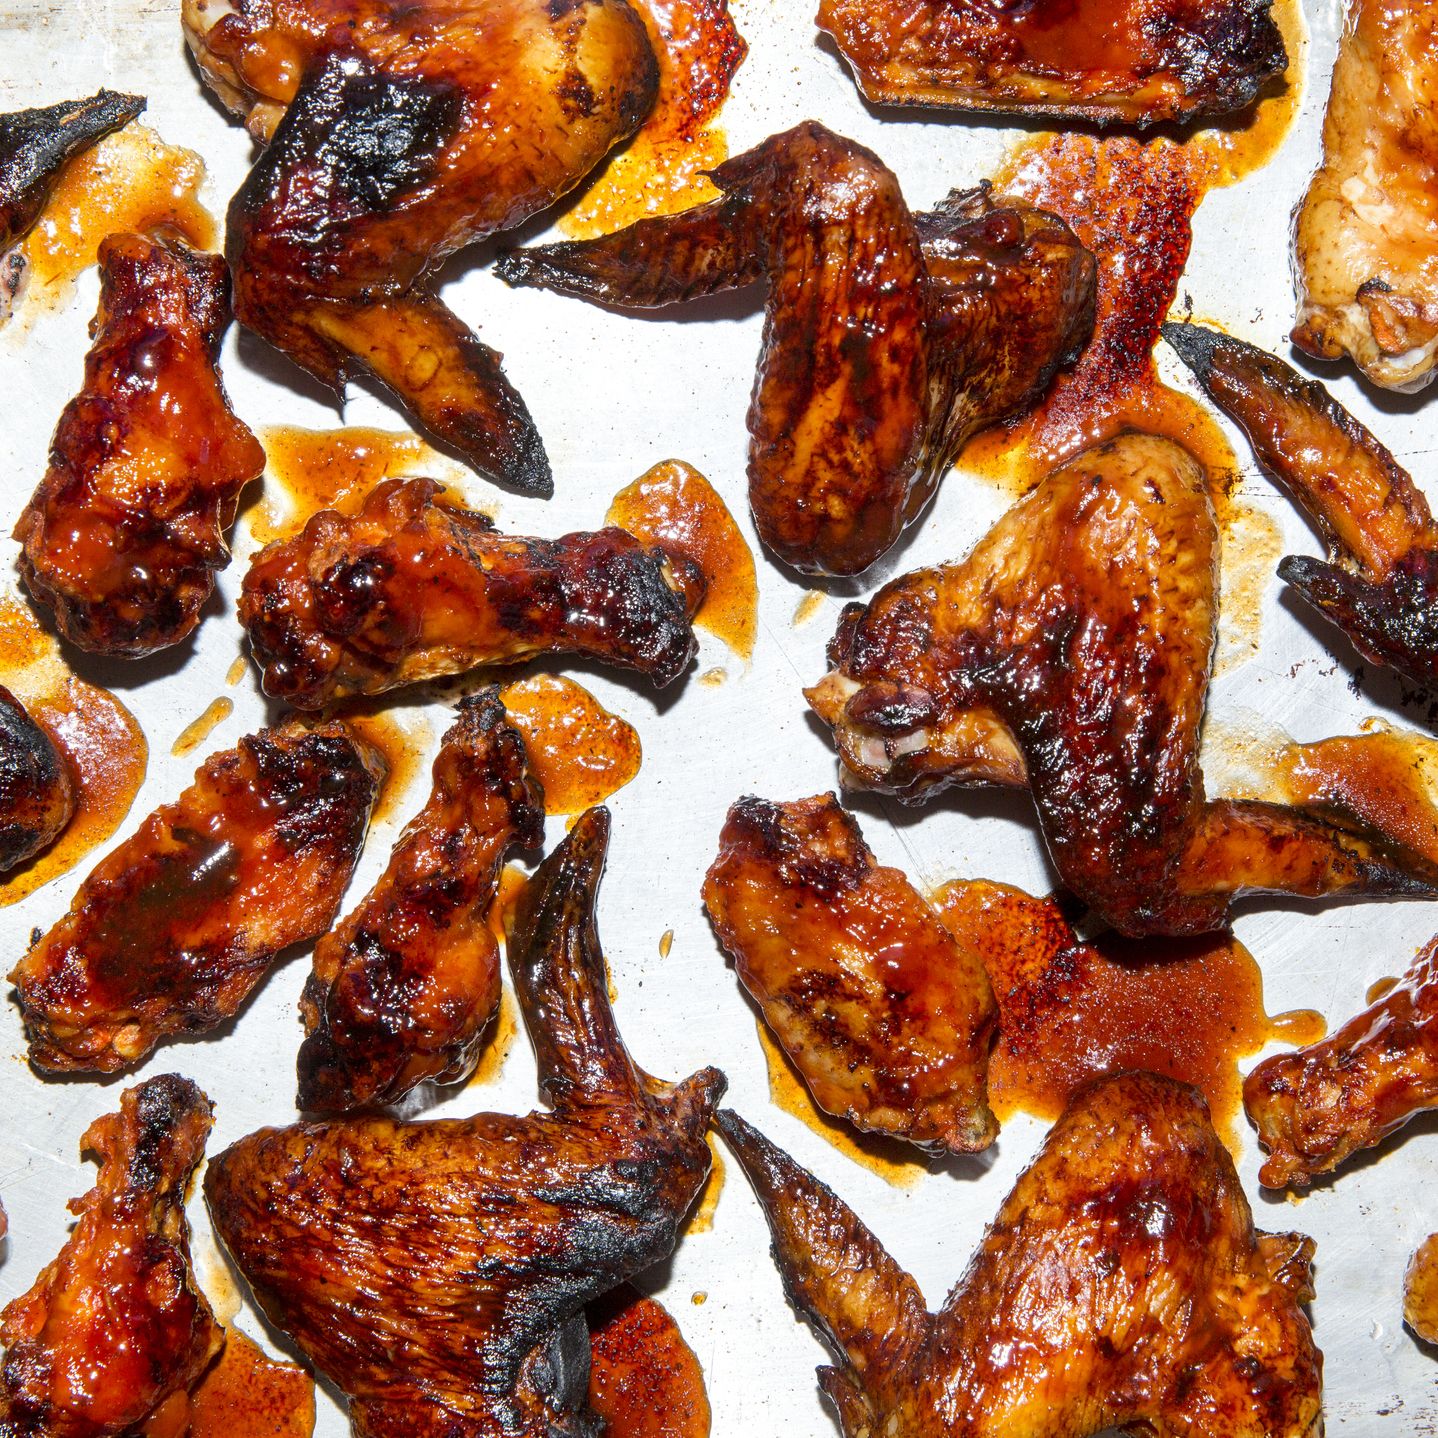 The 10 Best Chicken Wing Recipes You've Never Tasted